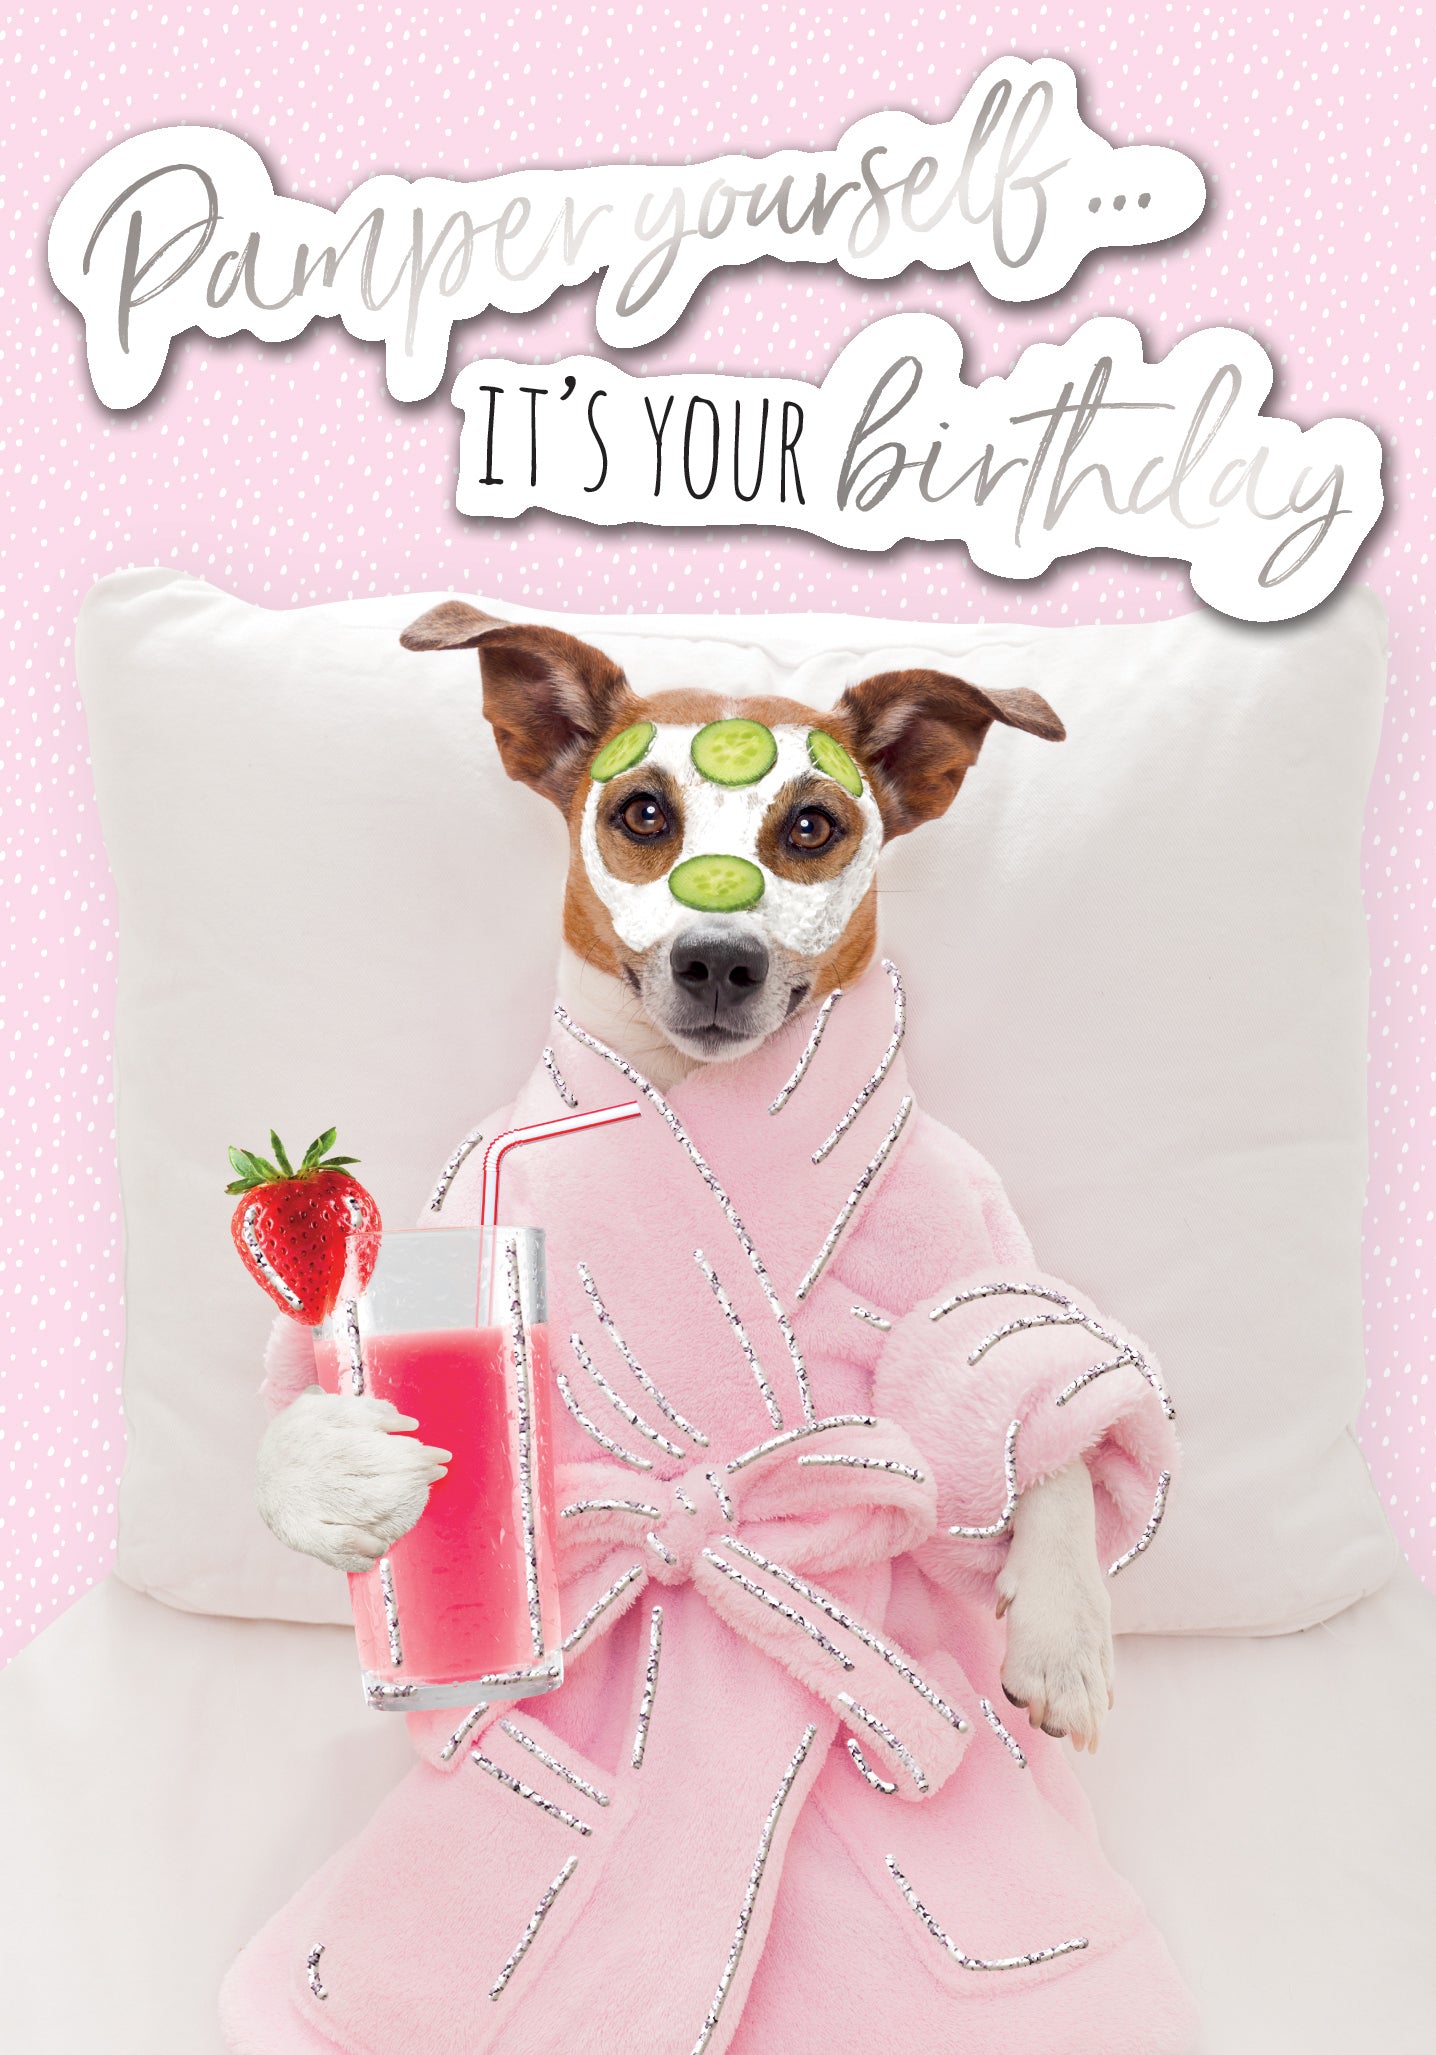 Pamper Yourself It's Your Birthday Greeting Card